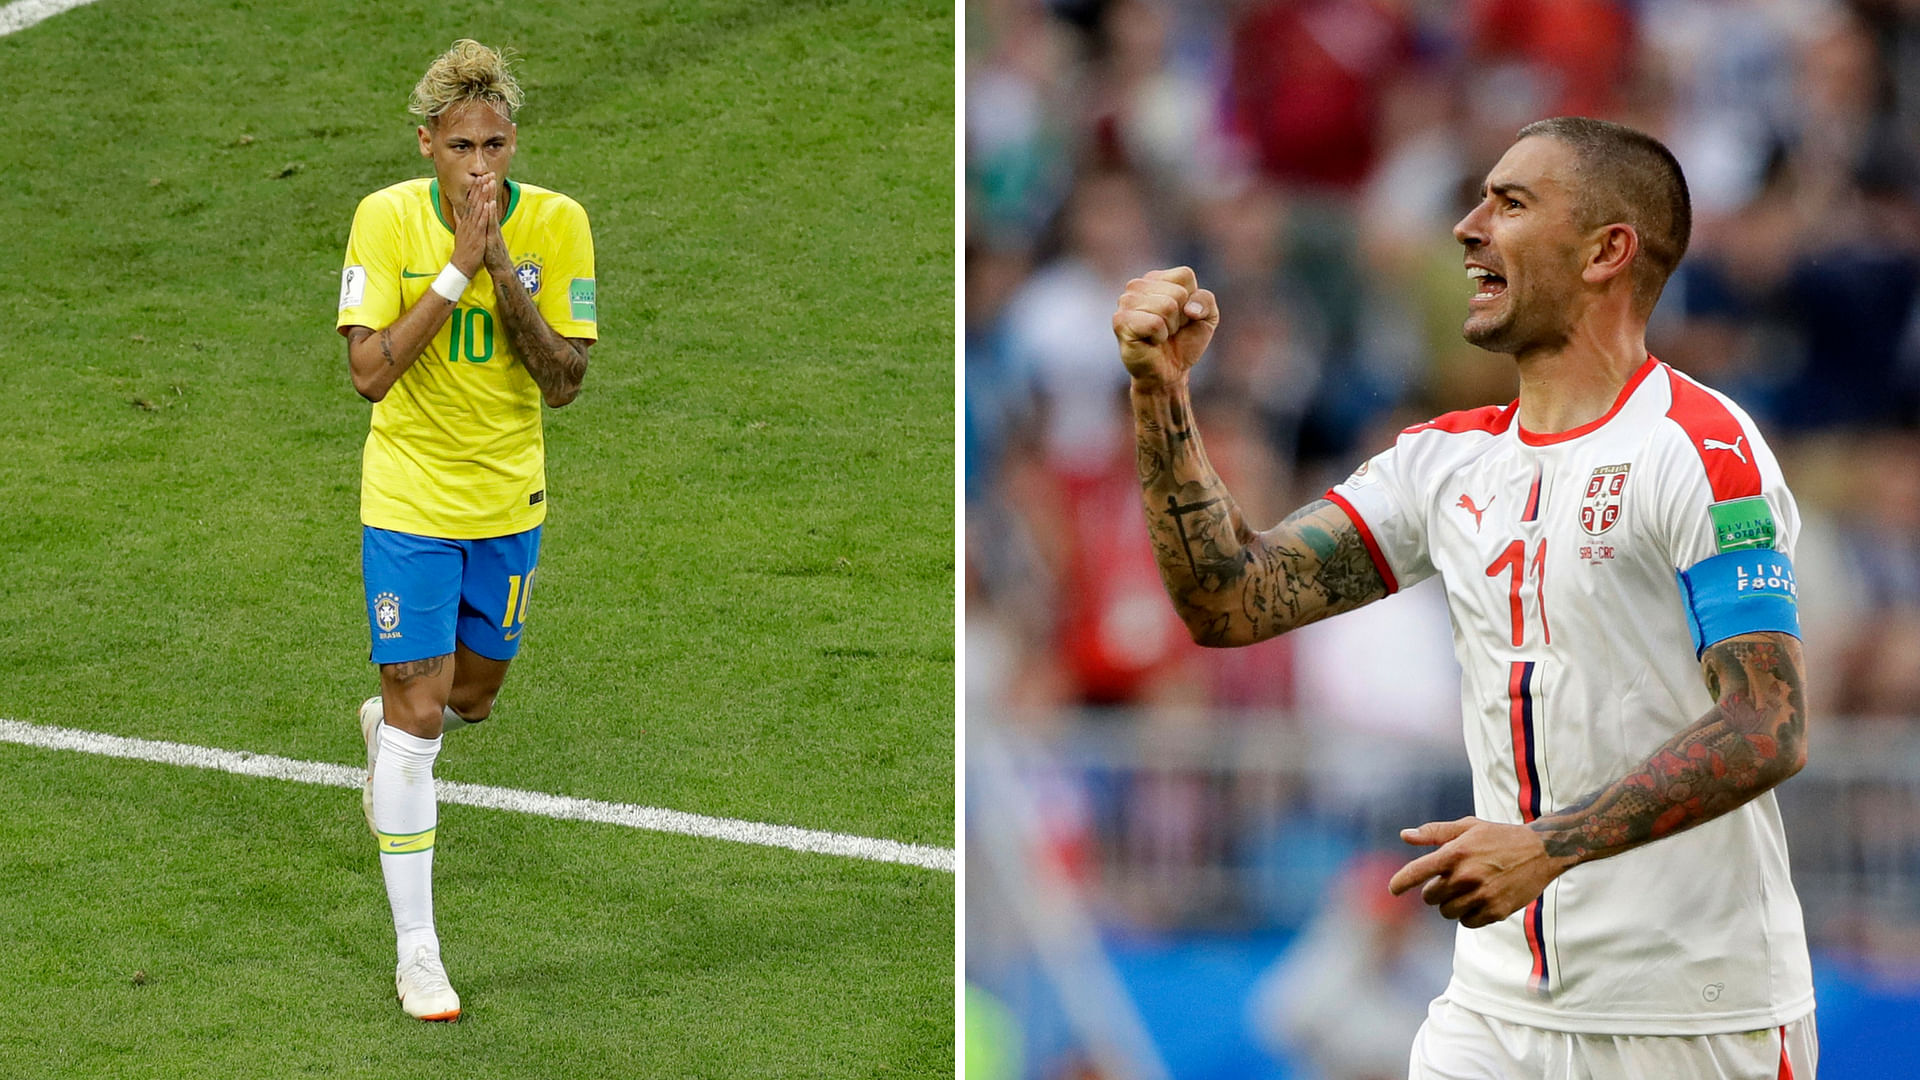 Serbia captain Kolarov (right) has already scored one decider for his country. Can superstar Neymar step up and dispel the clouds of unease surrounding Brazil?